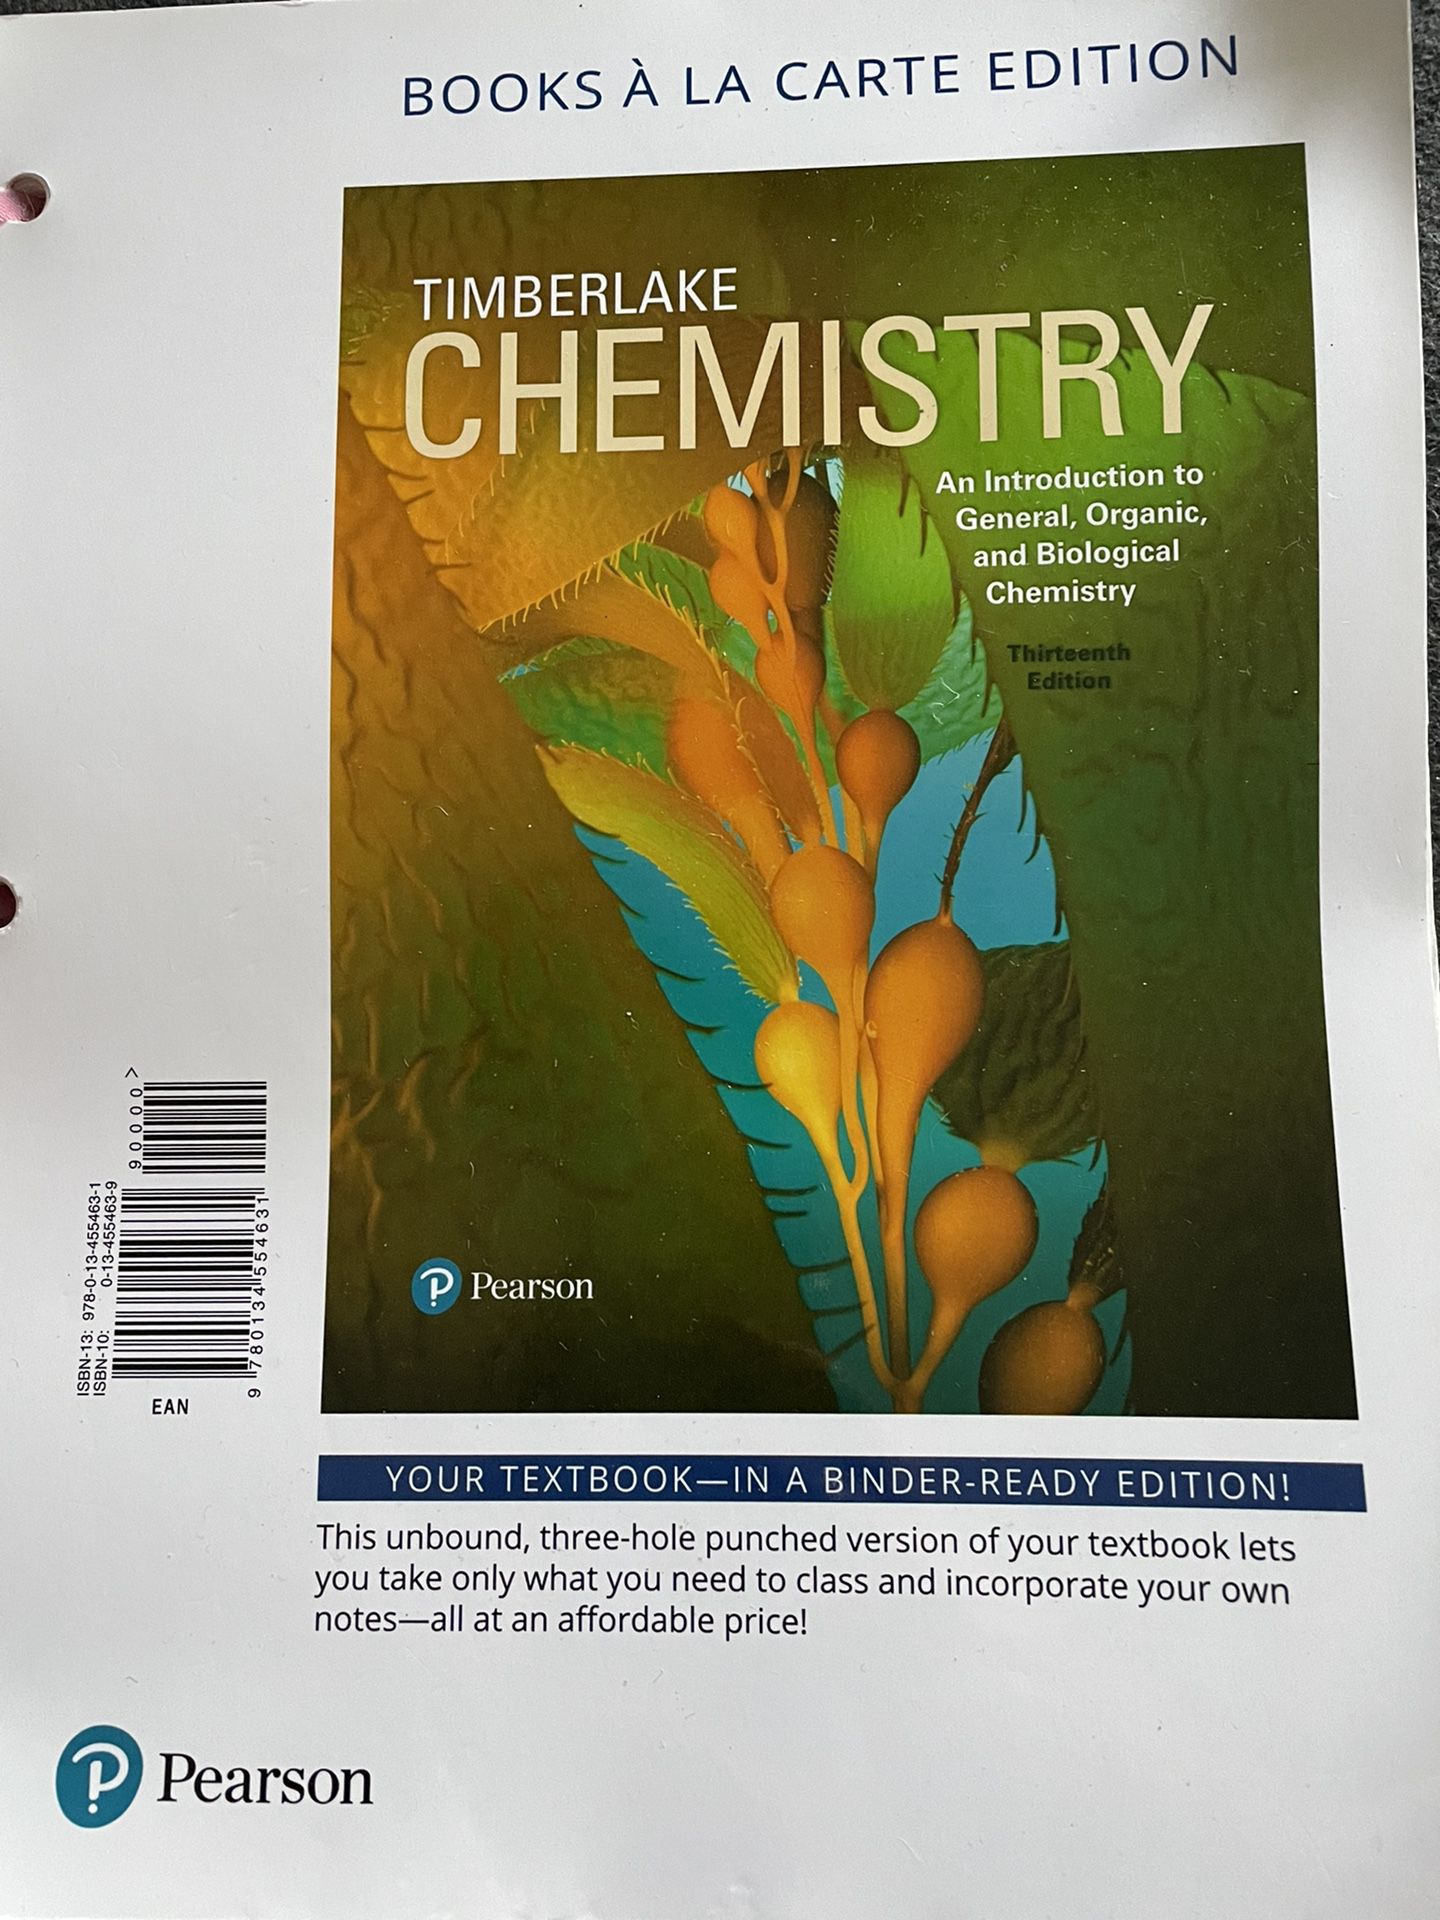 Chemistry:　Organic,　Edition　General,　To　for　An　Los　CA　Introduction　And　Thirteenth　Biological　Angeles,　Chemistry,　Sale　in　OfferUp